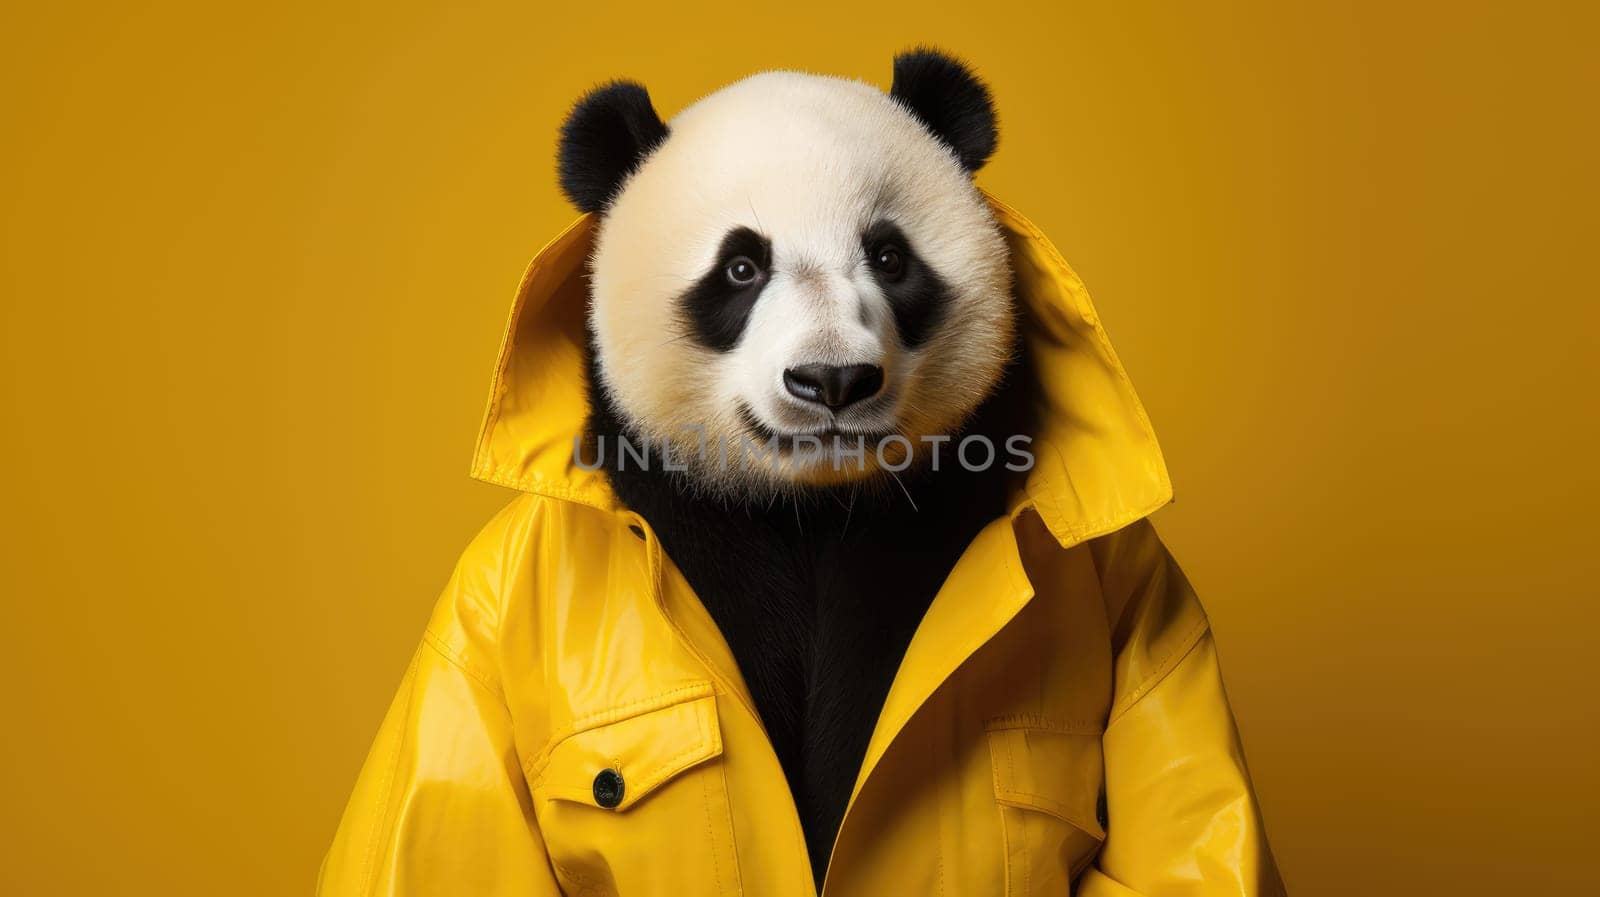 Hipster panda in a coat on a yellow background by natali_brill